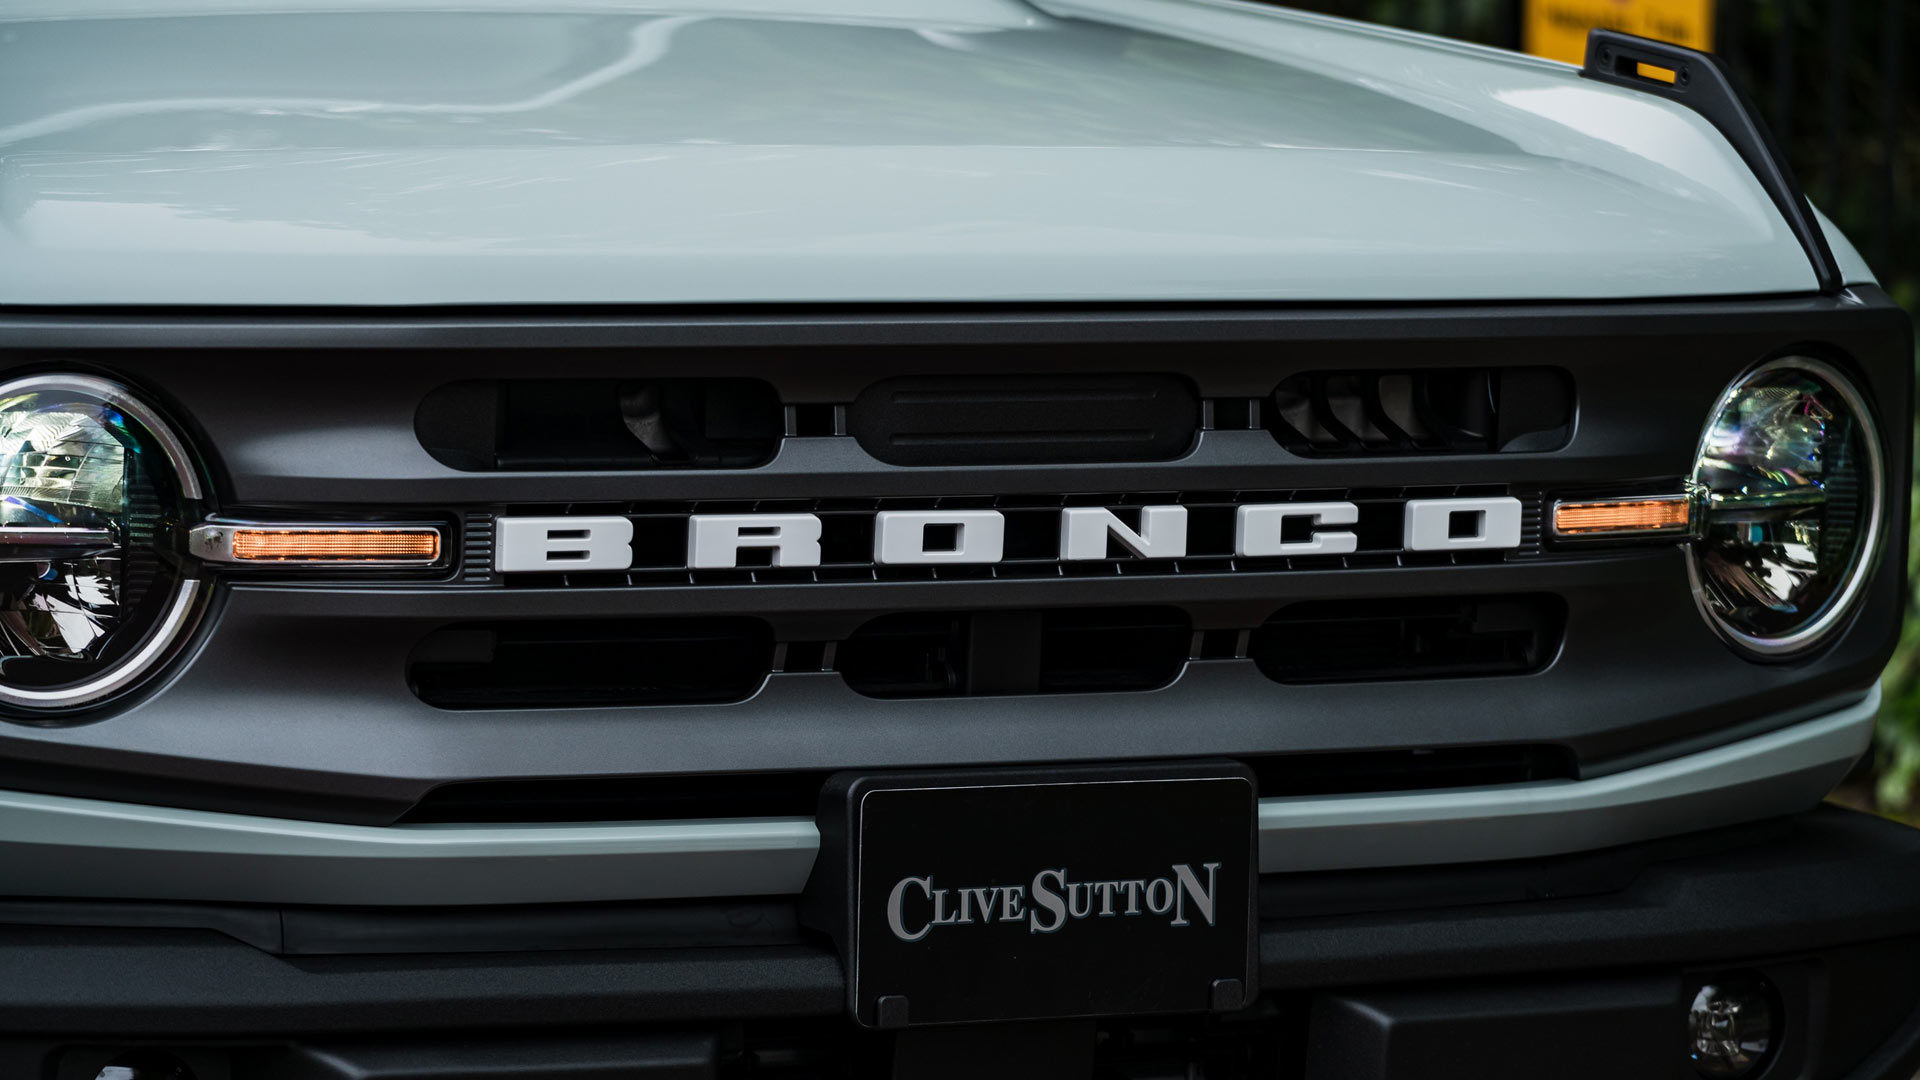 Ford Bronco in the UK